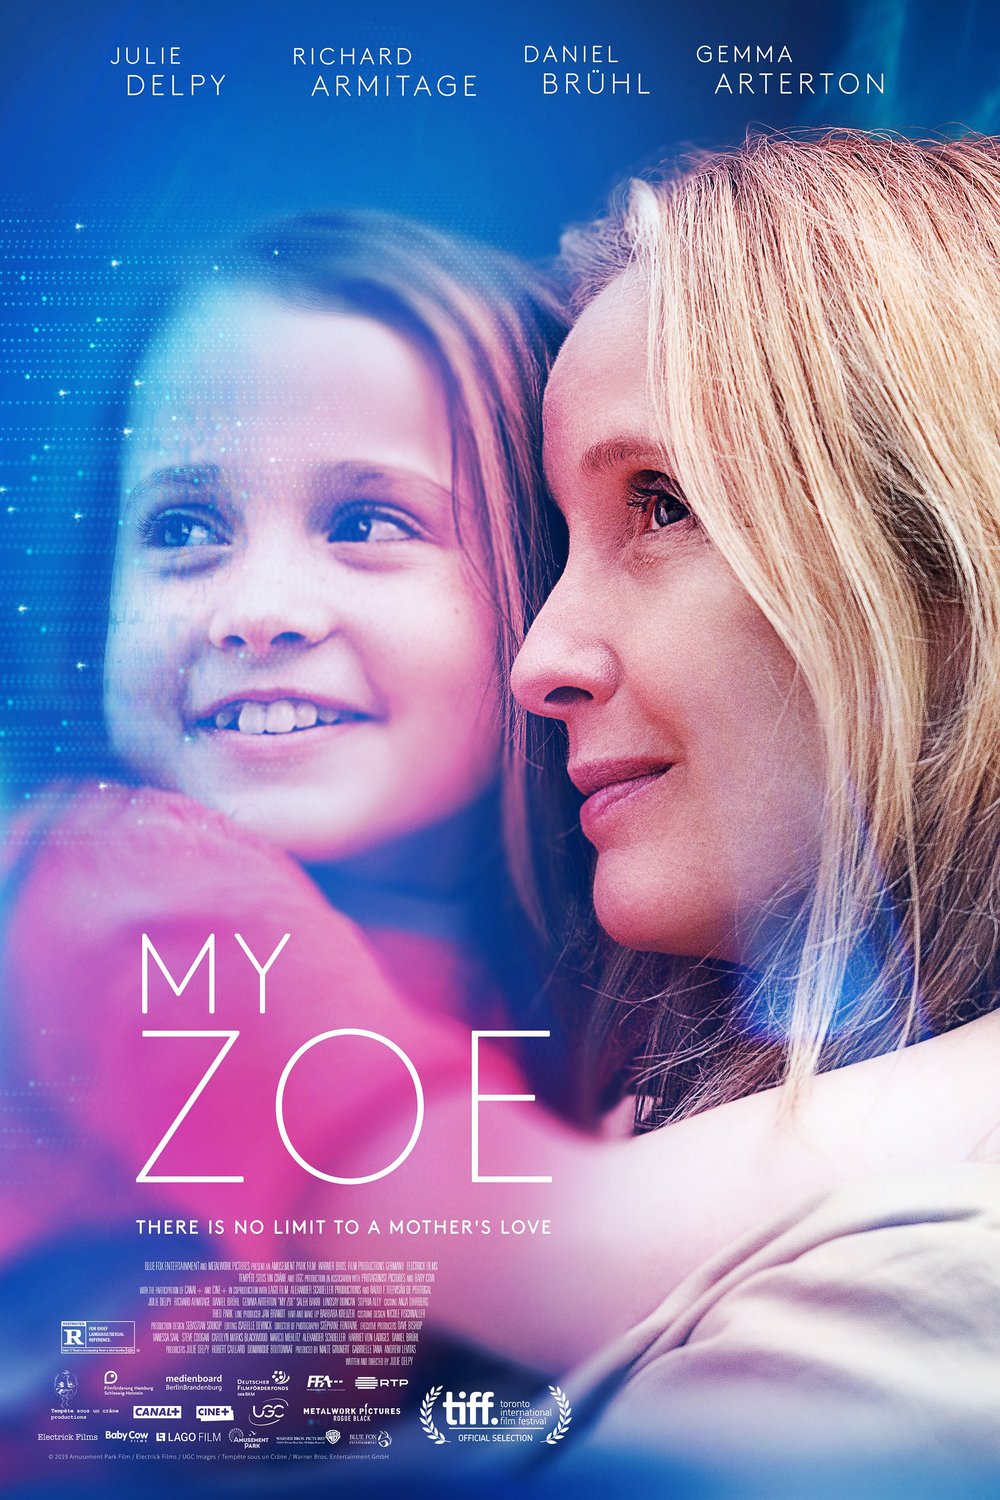 Poster of the movie My Zoe